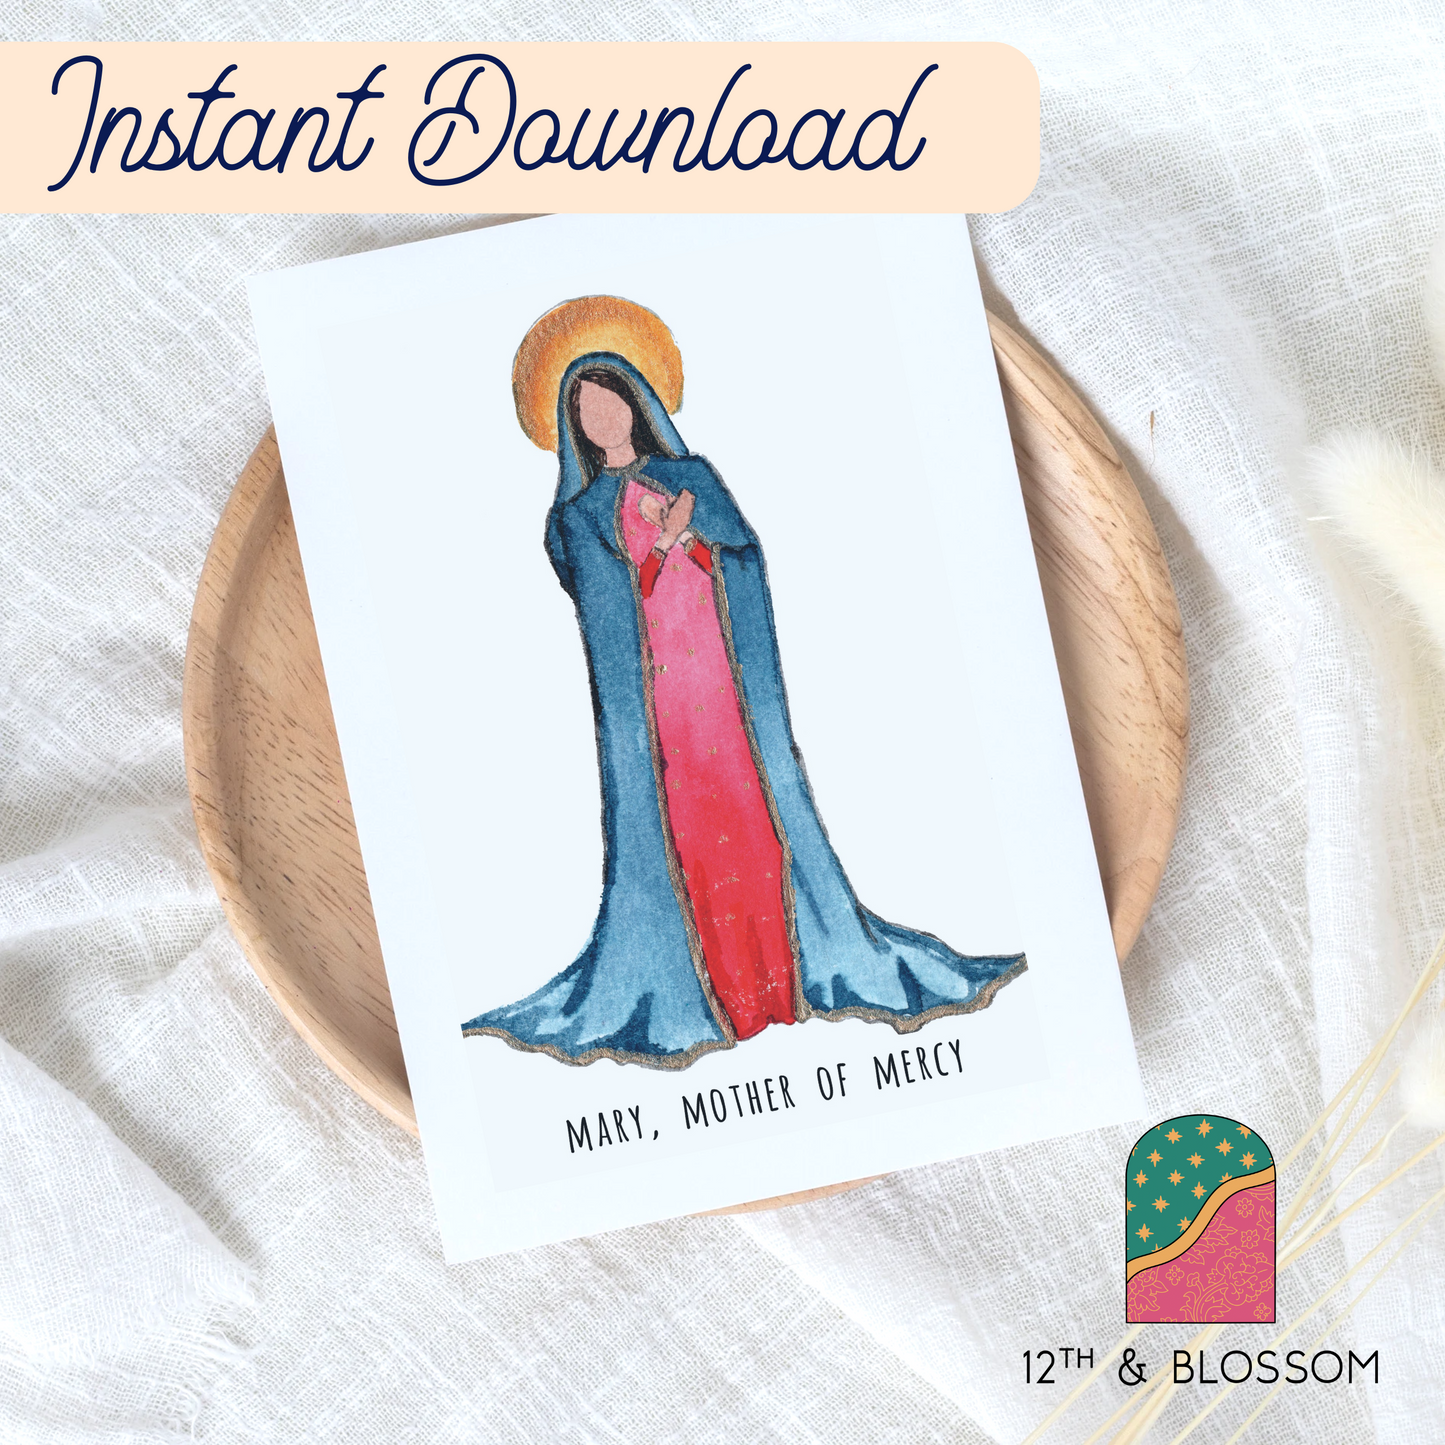 Instant Download - Mary, Mother of Mercy